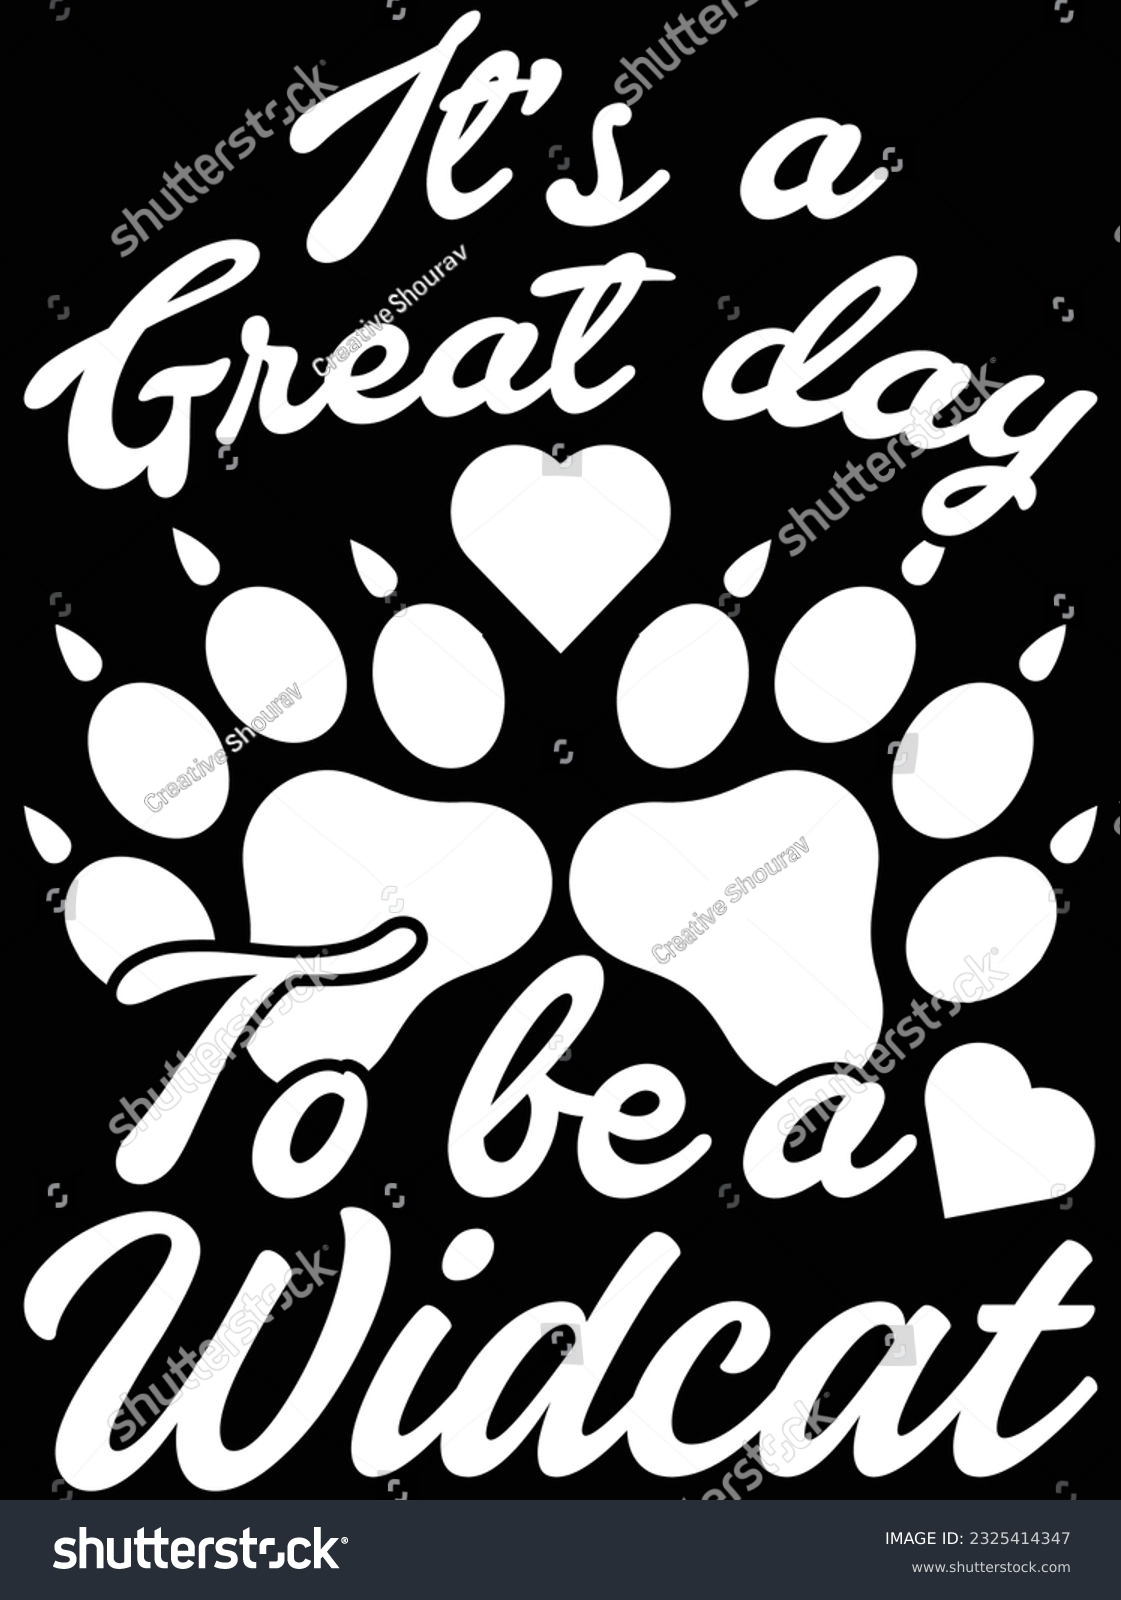 SVG of It's a great day to be a widcat vector art design, eps file. design file for t-shirt. SVG, EPS cuttable design file svg